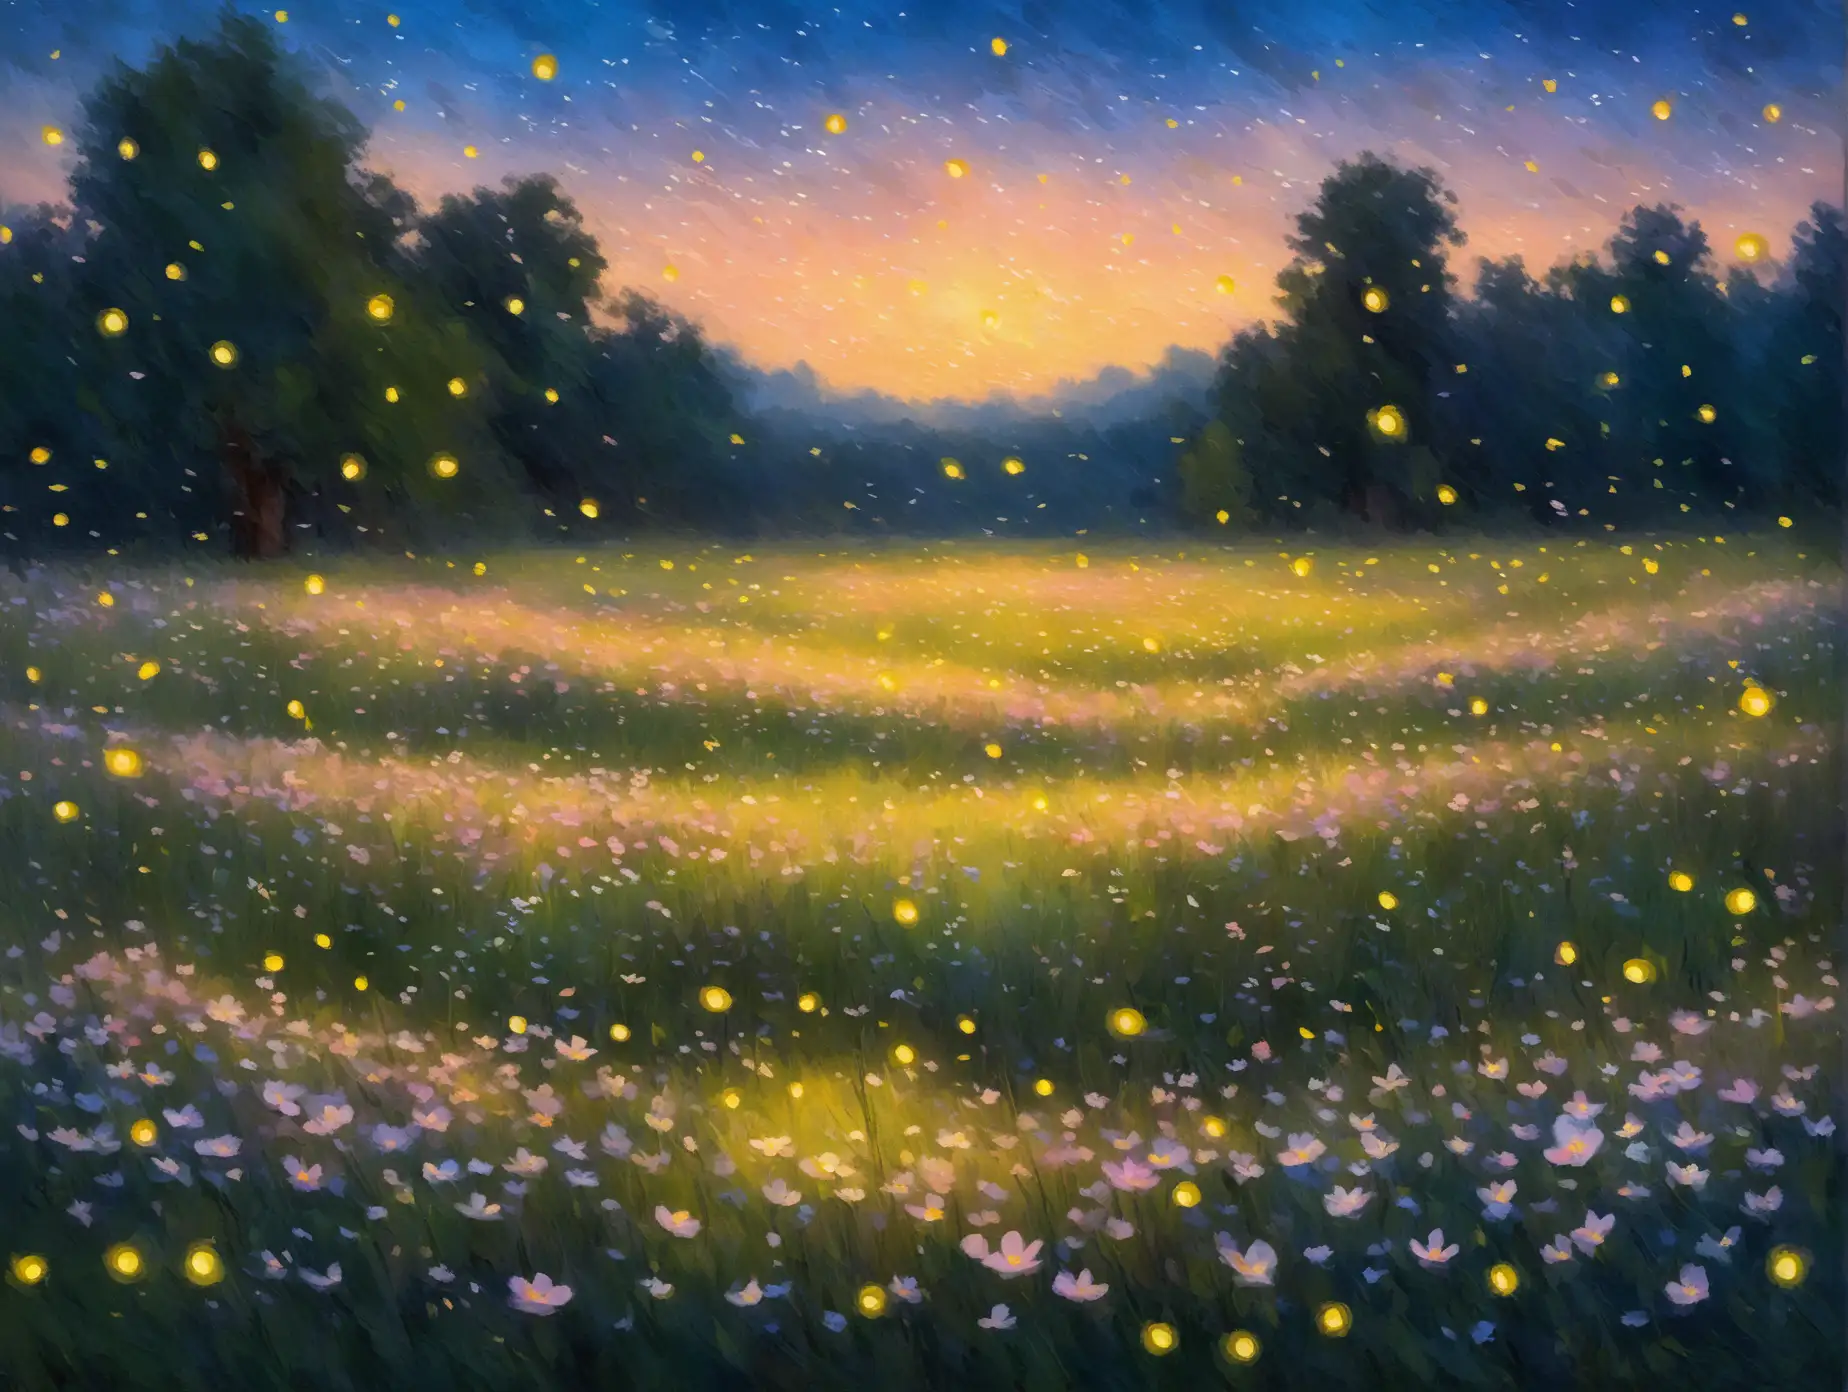 A meadow filled with four-o'clock flower blossoms at late dusk with a few fireflies flying around. In style of impressionist oil painting.